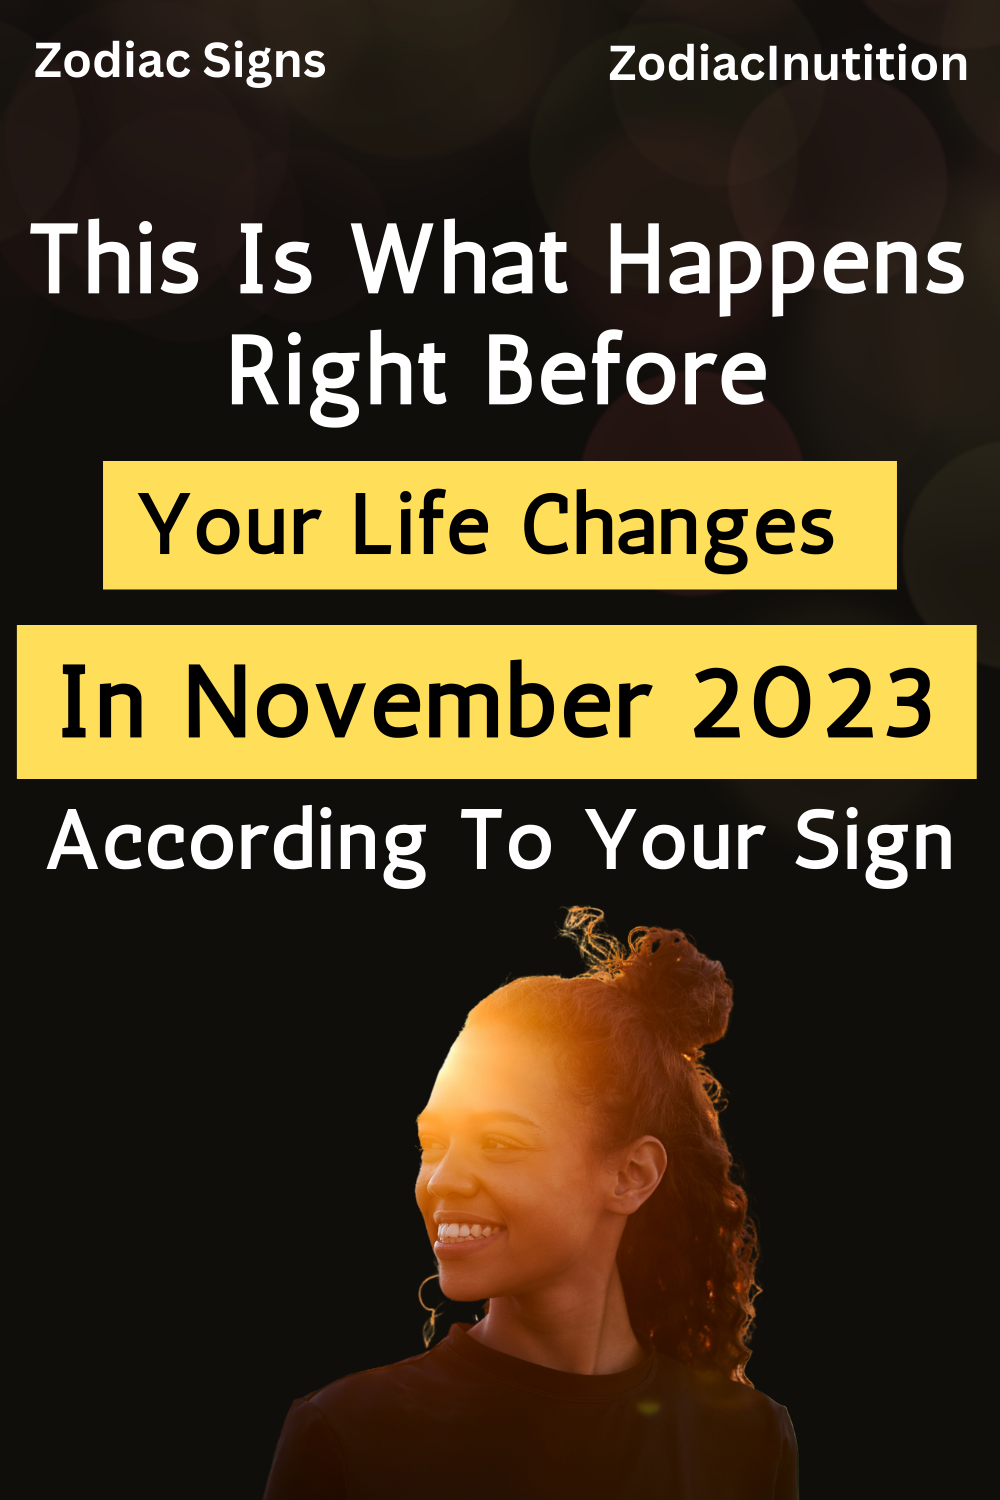 This Is What Happens Right Before Your Life Changes In November 2023 According To Your Sign